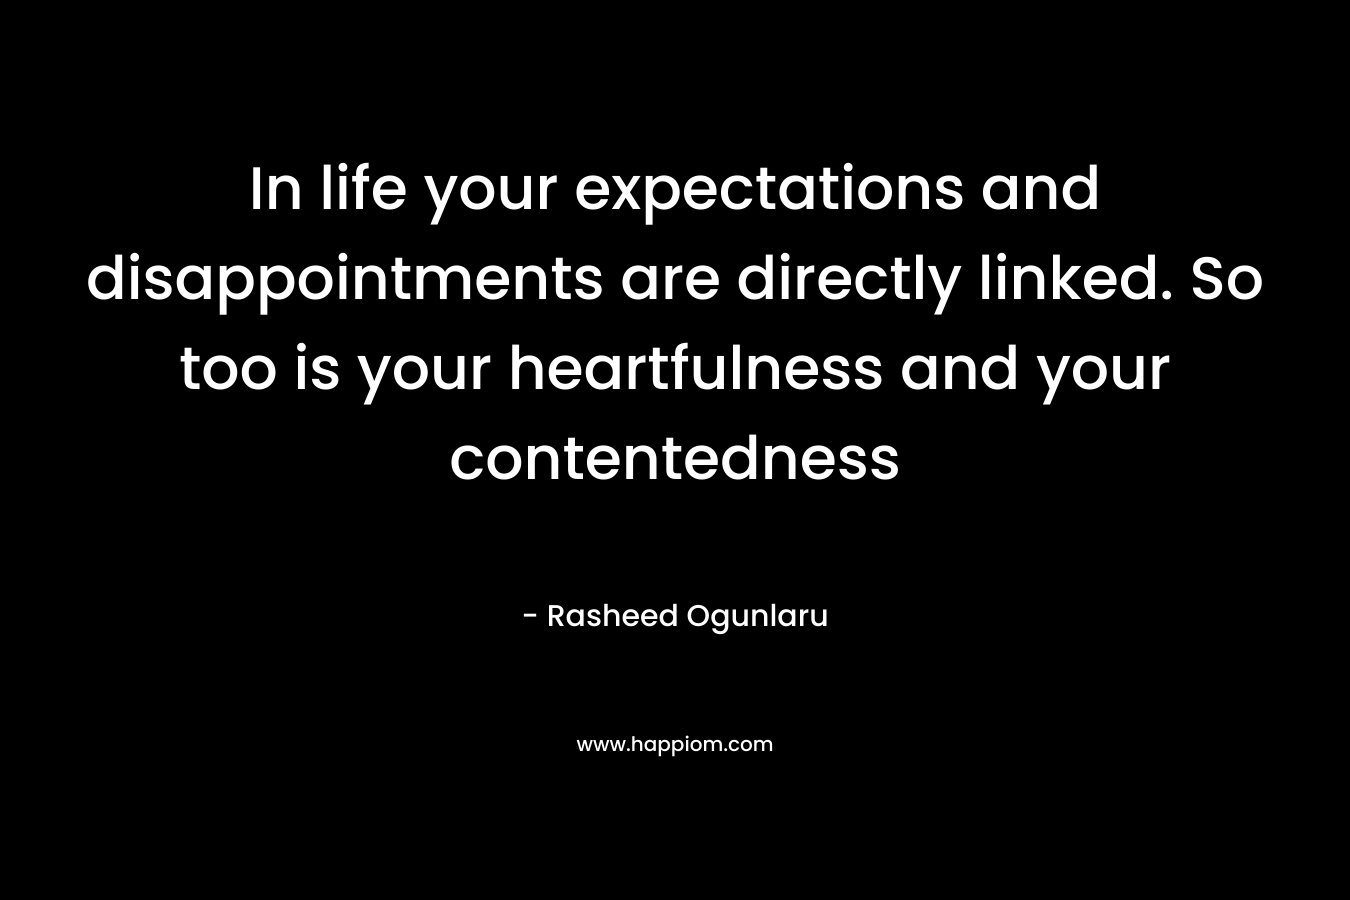 In life your expectations and disappointments are directly linked. So too is your heartfulness and your contentedness